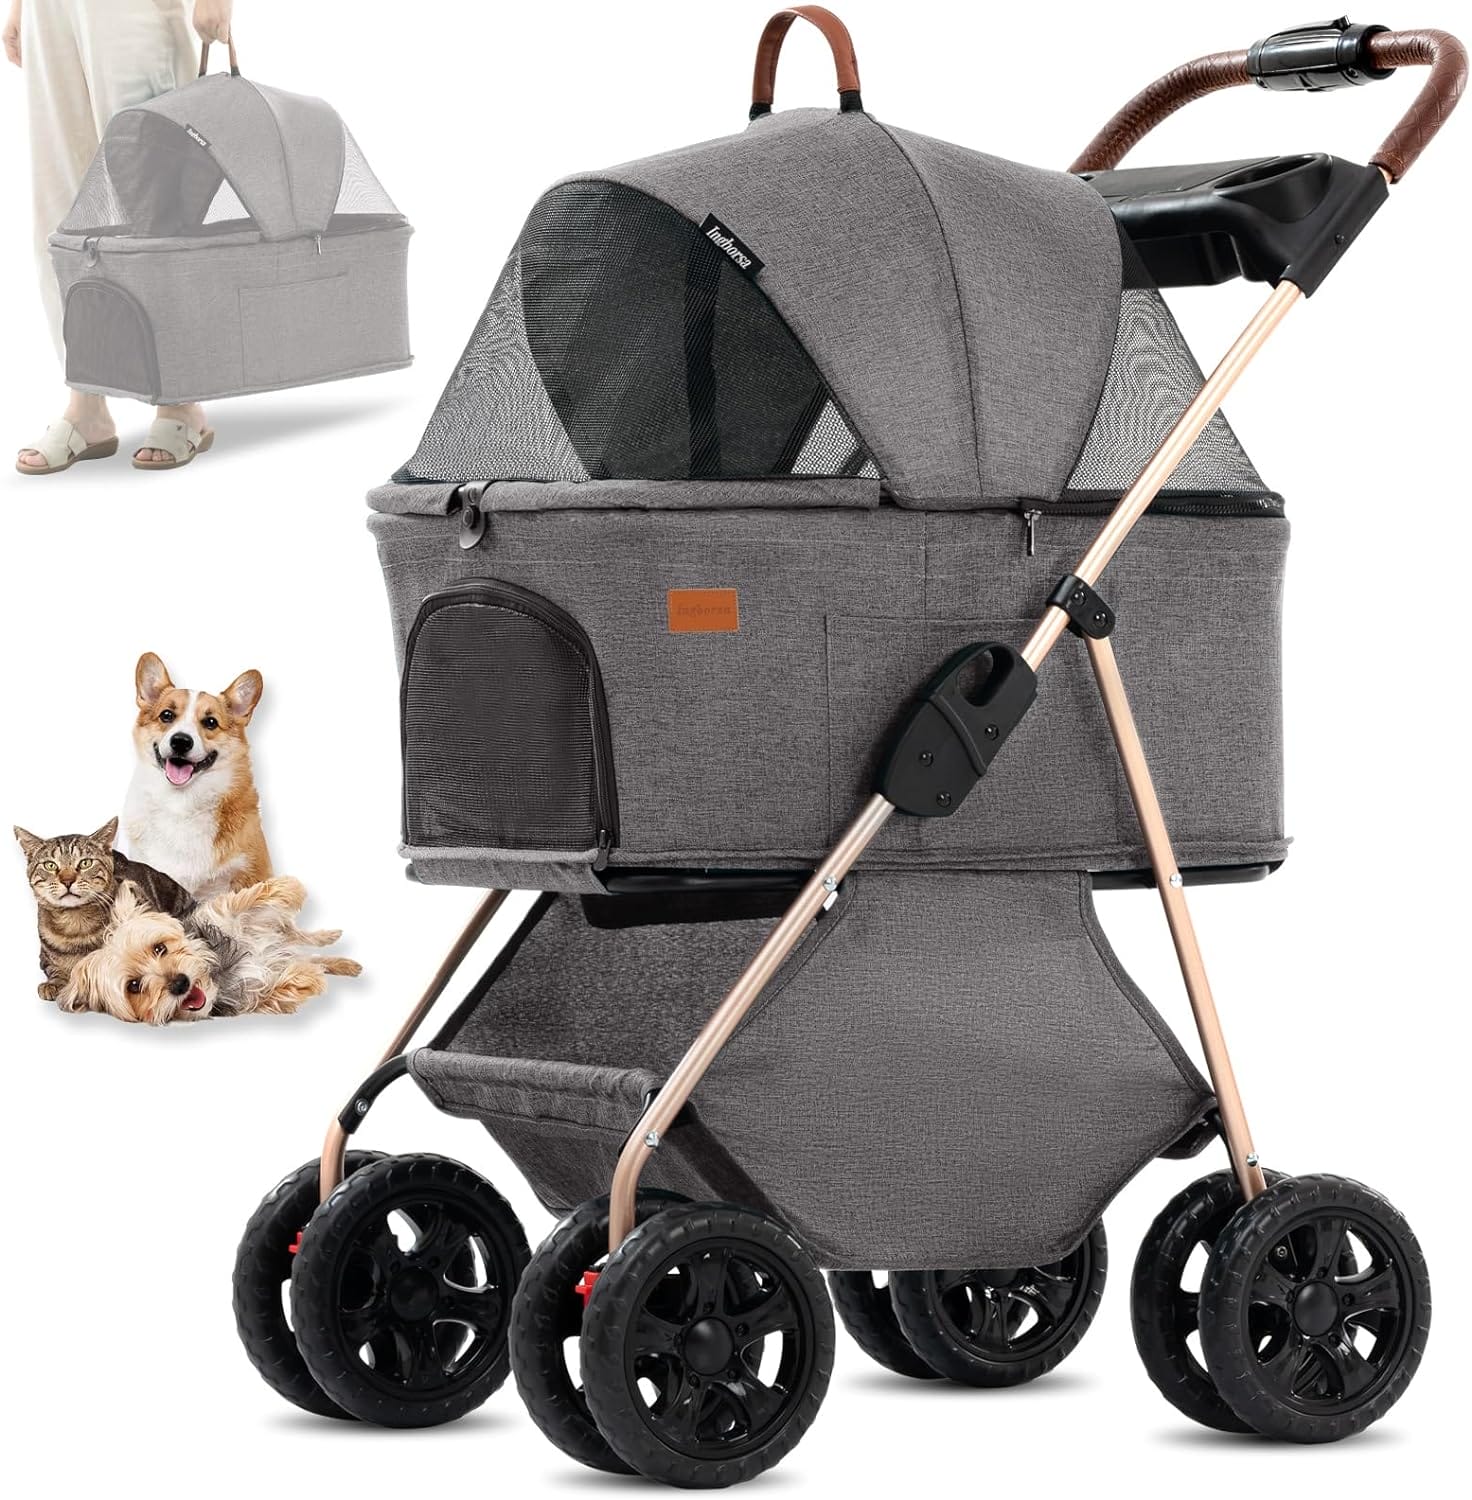 Multifunction Pet Travel System Review